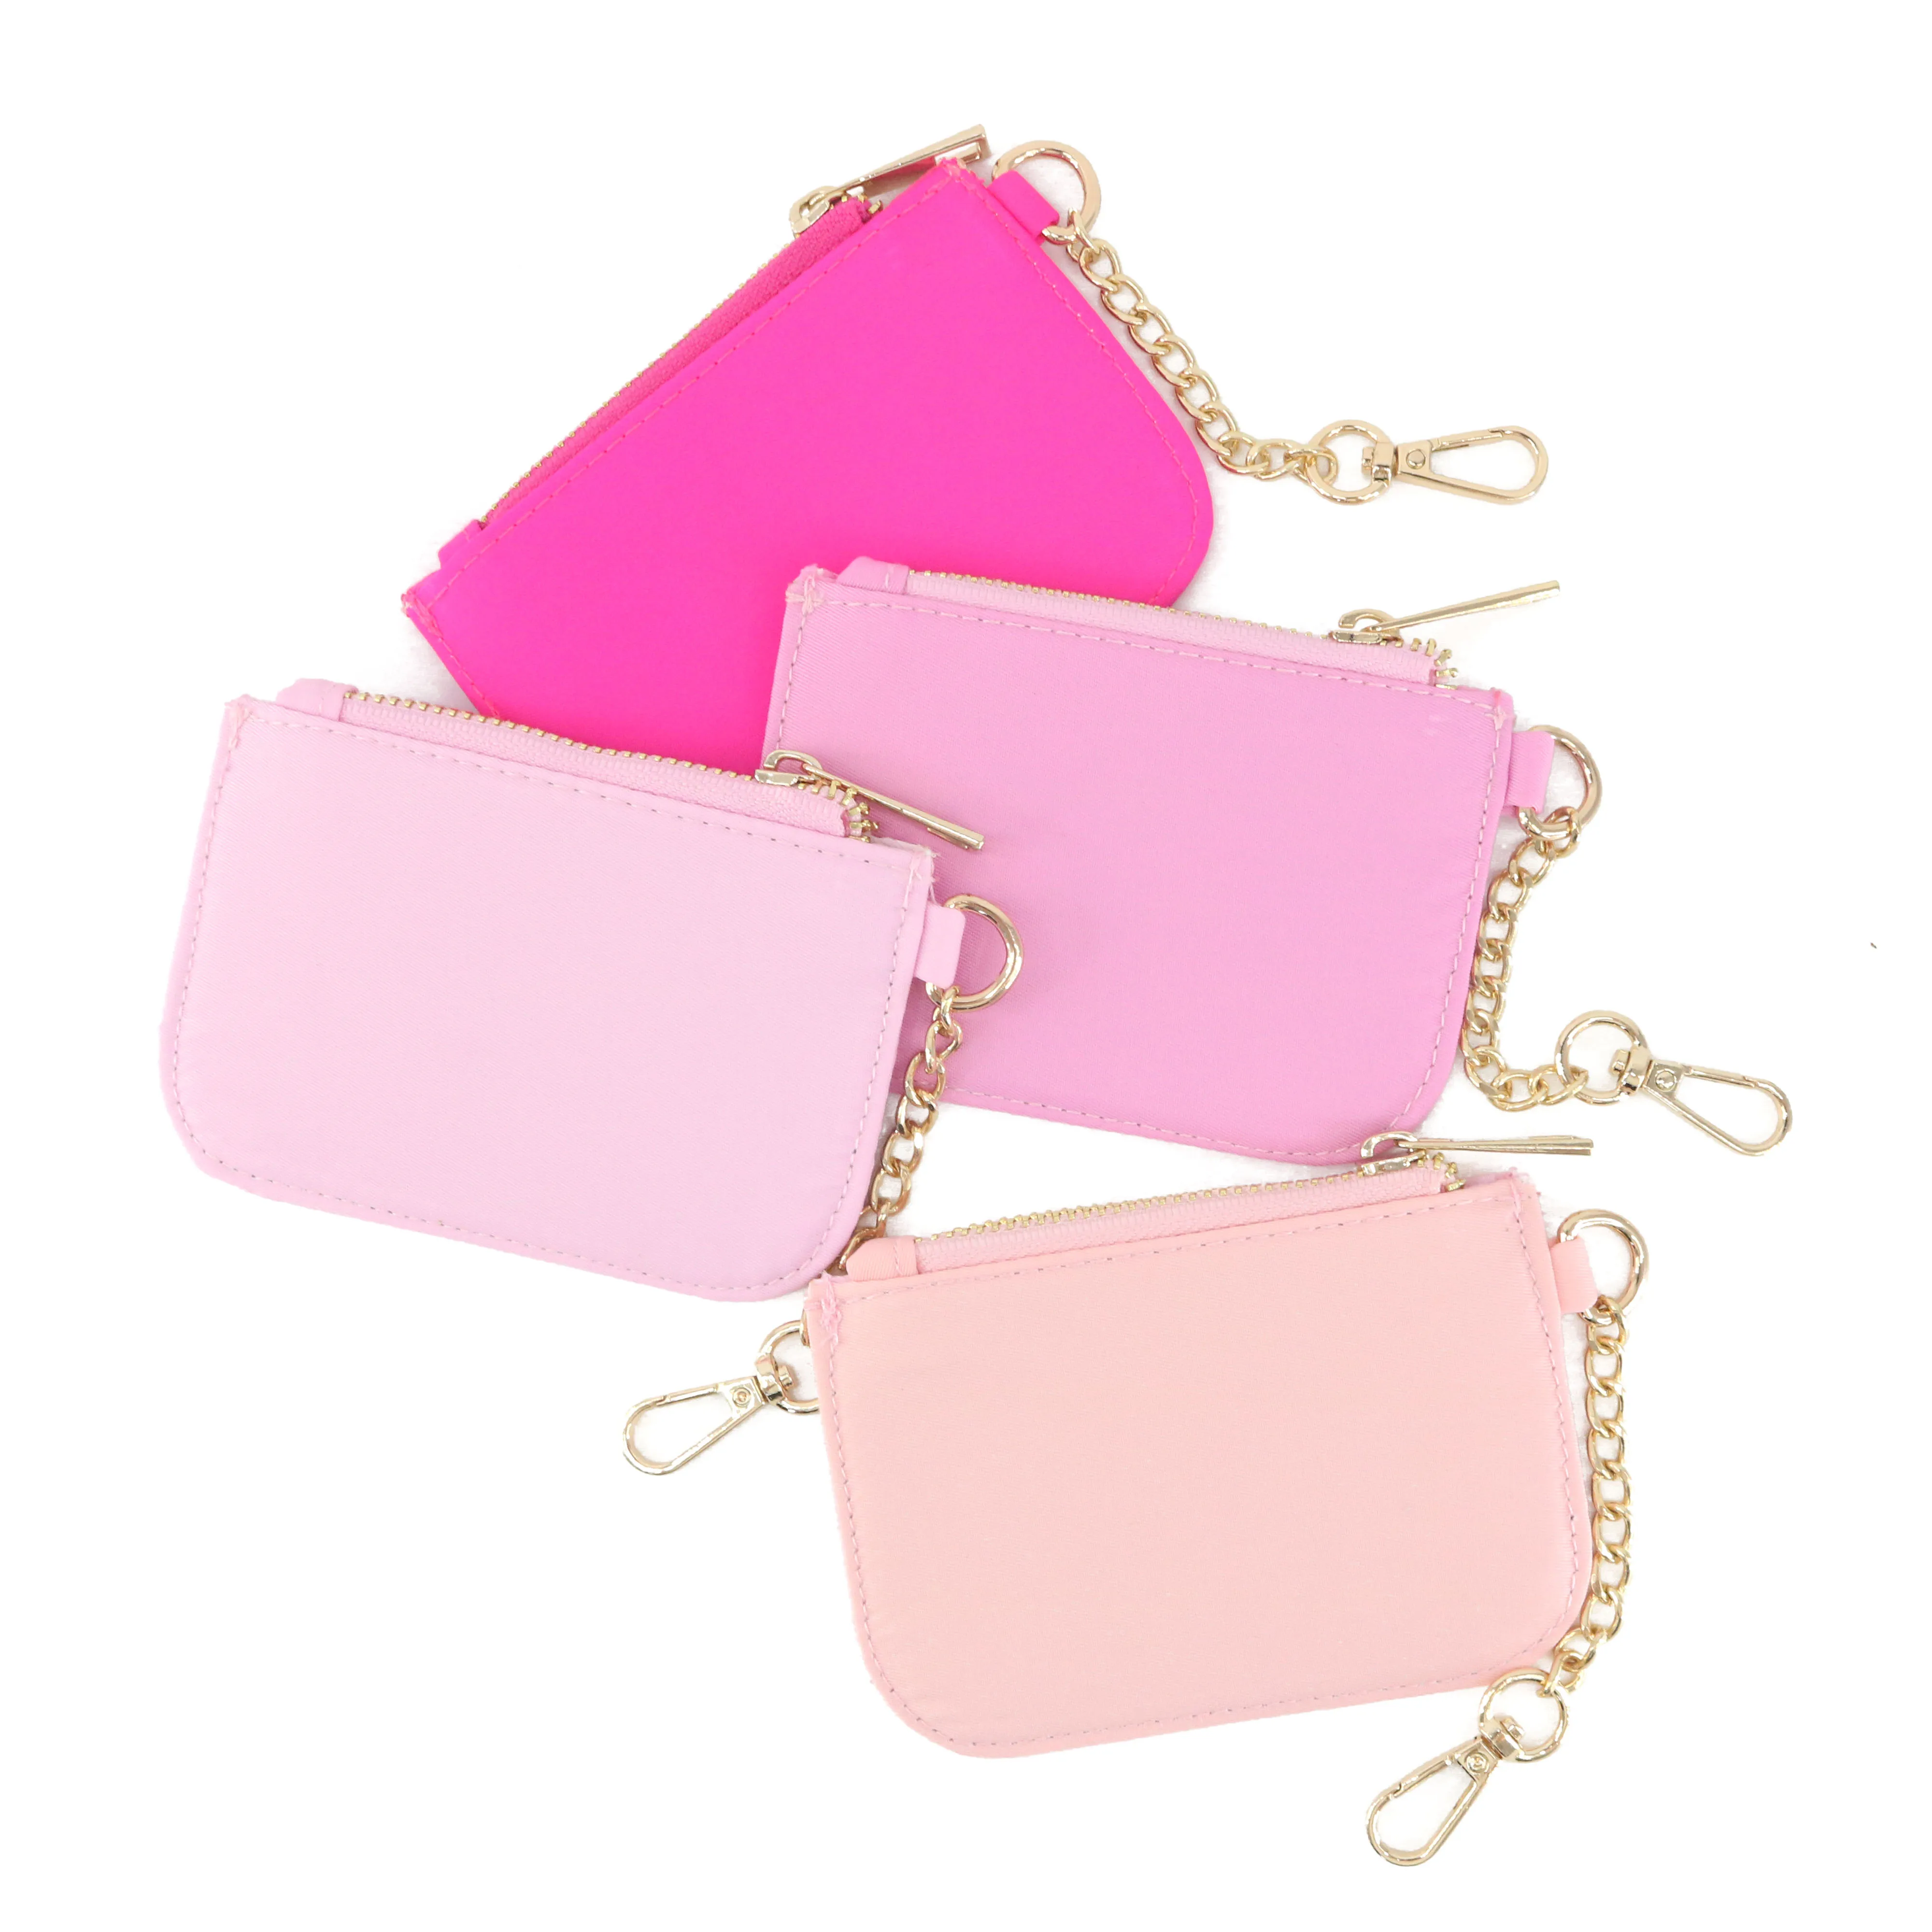 Fresh Solid Color Small Nylon Coin Purse Can Hold Coins Business Card Key Exquisite Small Mini Casual Coin Purse